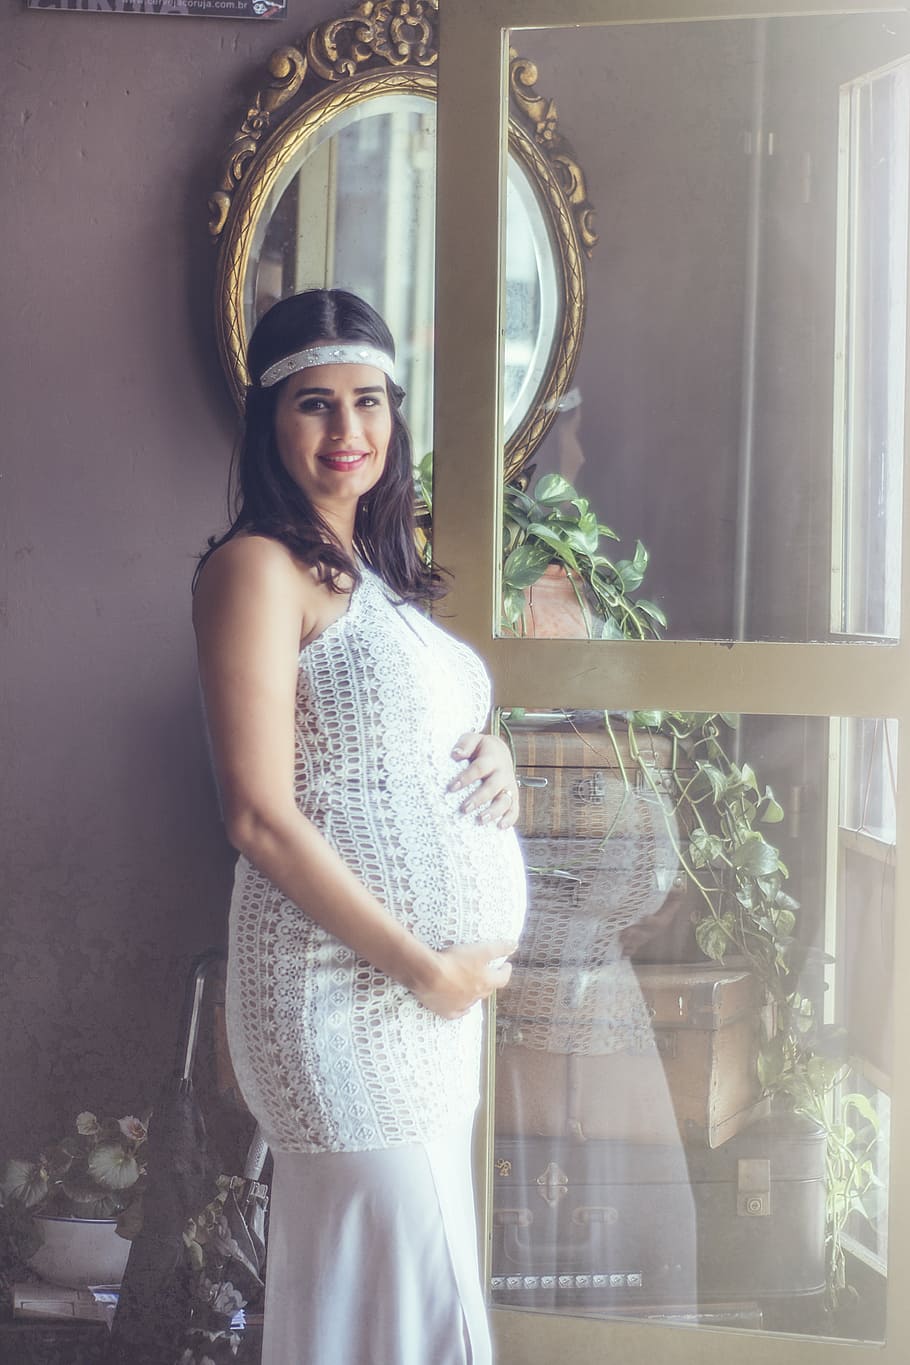 woman in white halter top standing near the mirror, pregnant woman